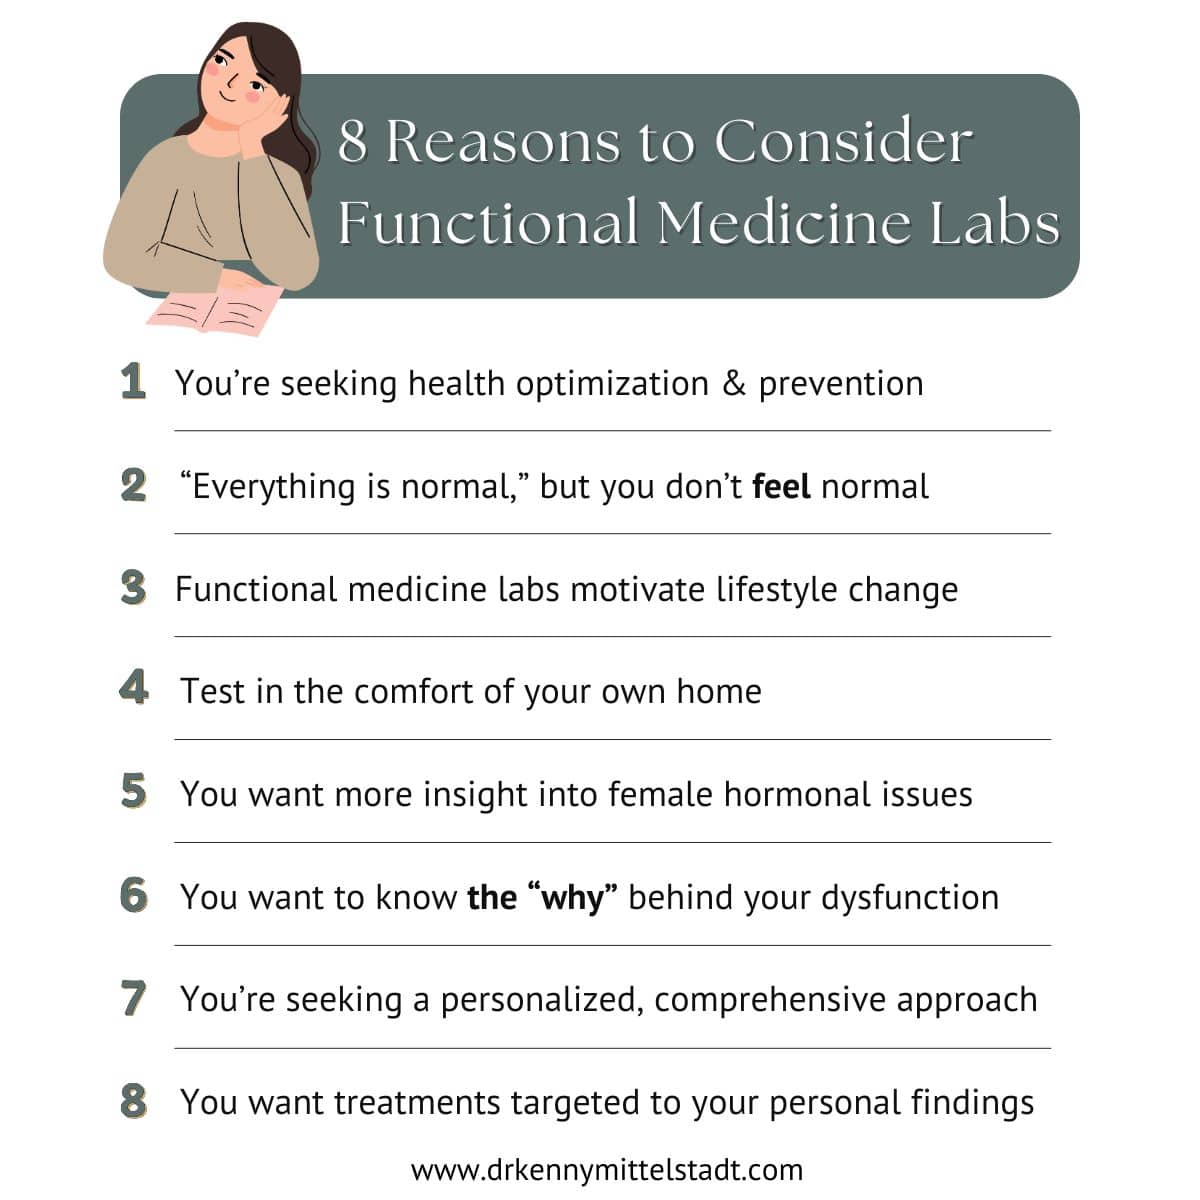 This image lists the following 8 reasons that functional medicine labs might be for someone that are discussed in the body of this blog post. 